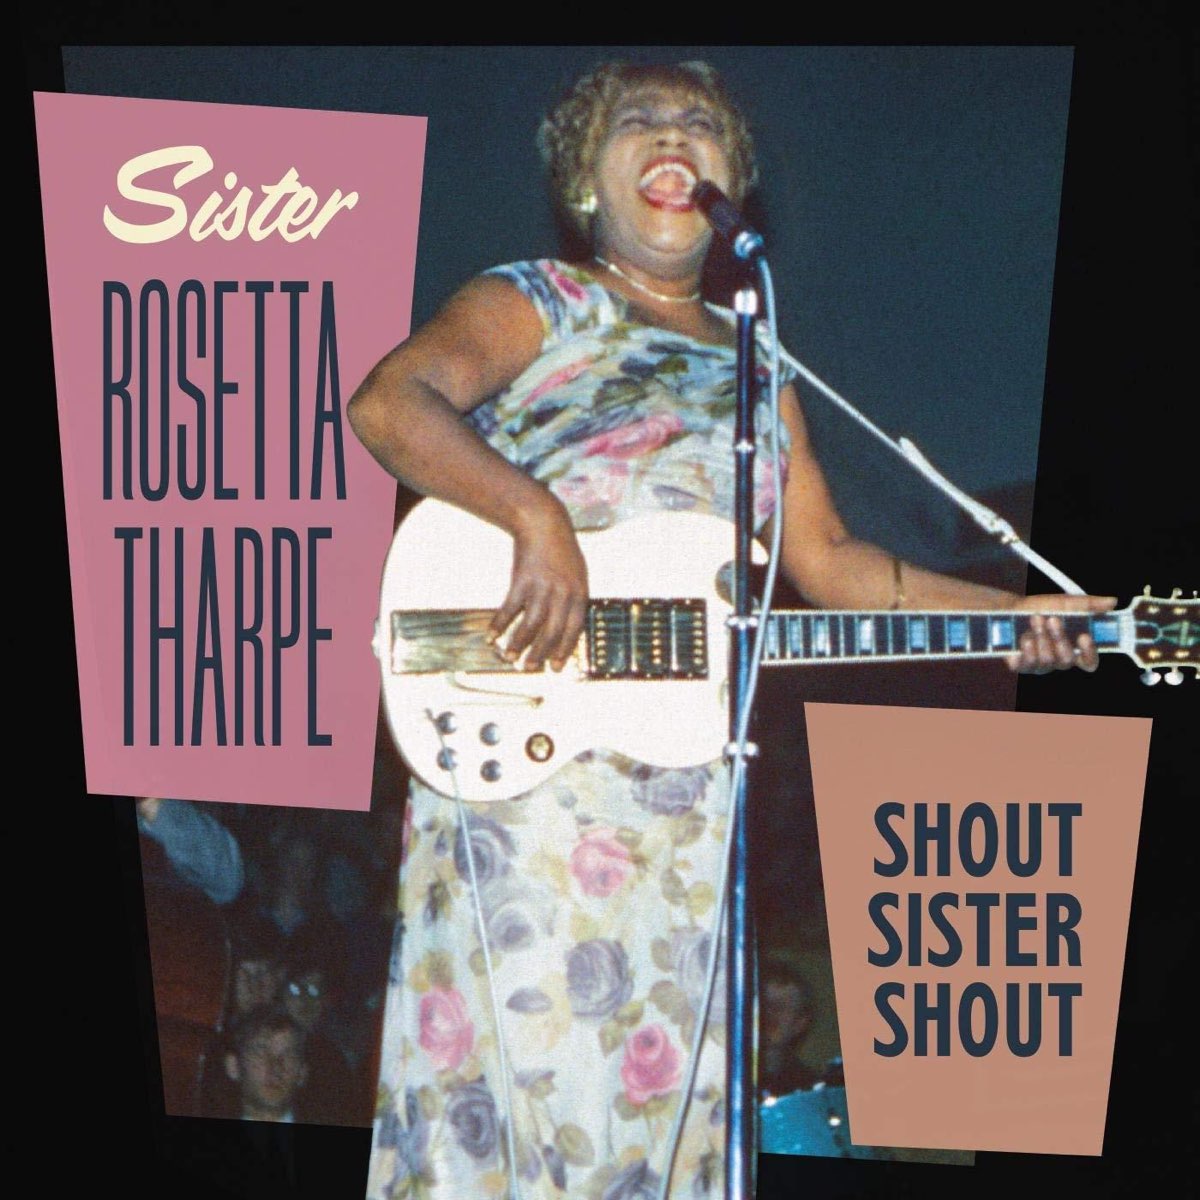 ‎Shout, Sister, Shout (Live 1957-1971) by Sister Rosetta Tharpe on ...